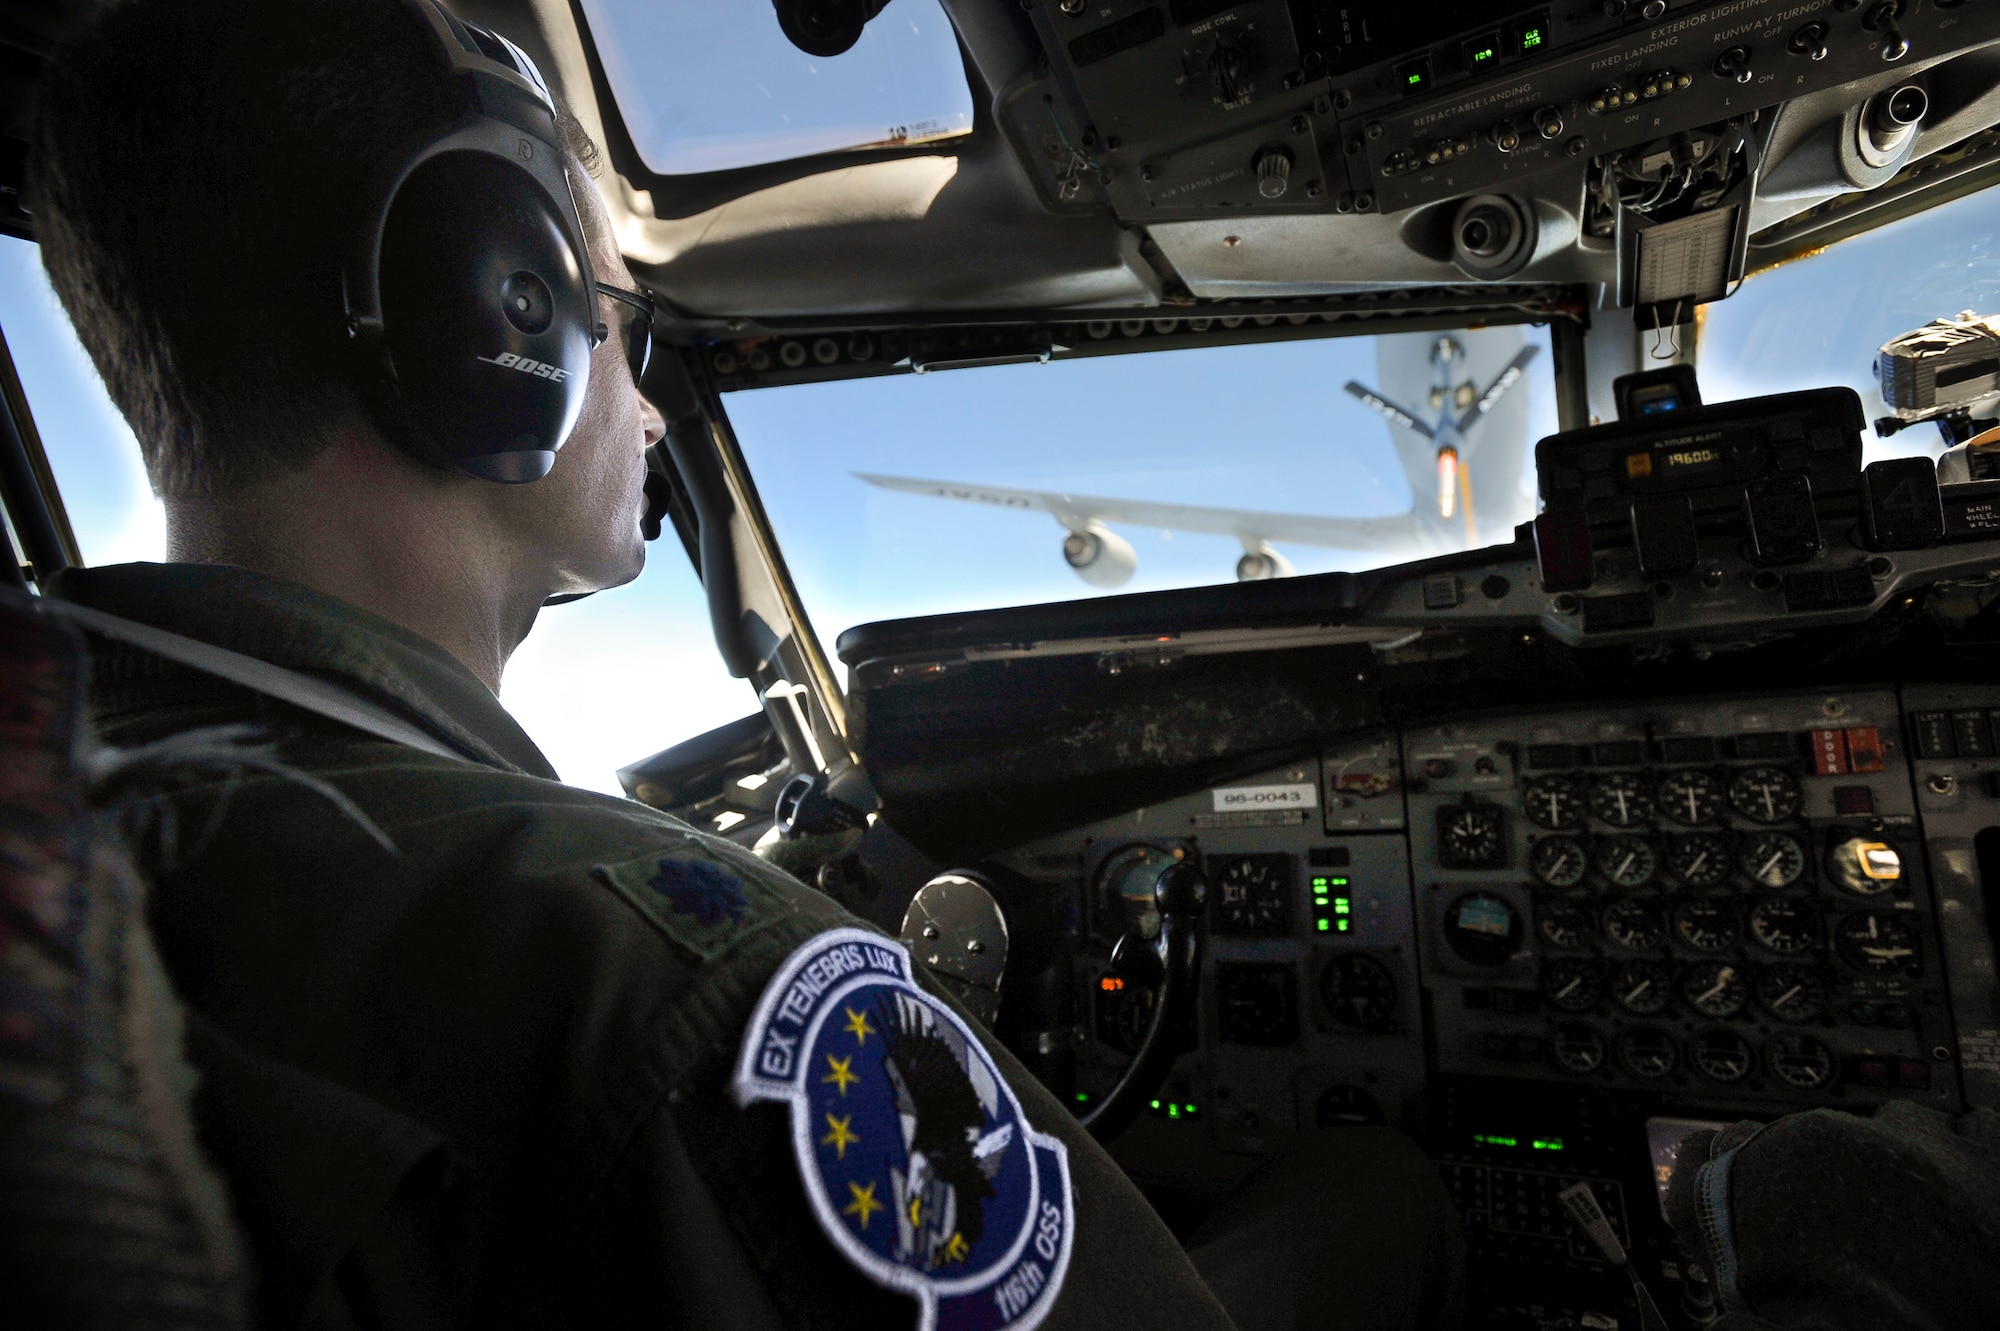 Air National Guard Lt. Col. Christopher, 116th Operations Support Squadron, flies the E-8 Joint STARS in position to receive fuel from a KC-135 Stratotanker, Robins Air Force Base, Ga., June 12, 2012.  The inflight refueling procedure was conducted during a mission supporting exercise Iron Dagger 2012.
(National Guard photo by Master Sgt. Roger Parsons/Released)
